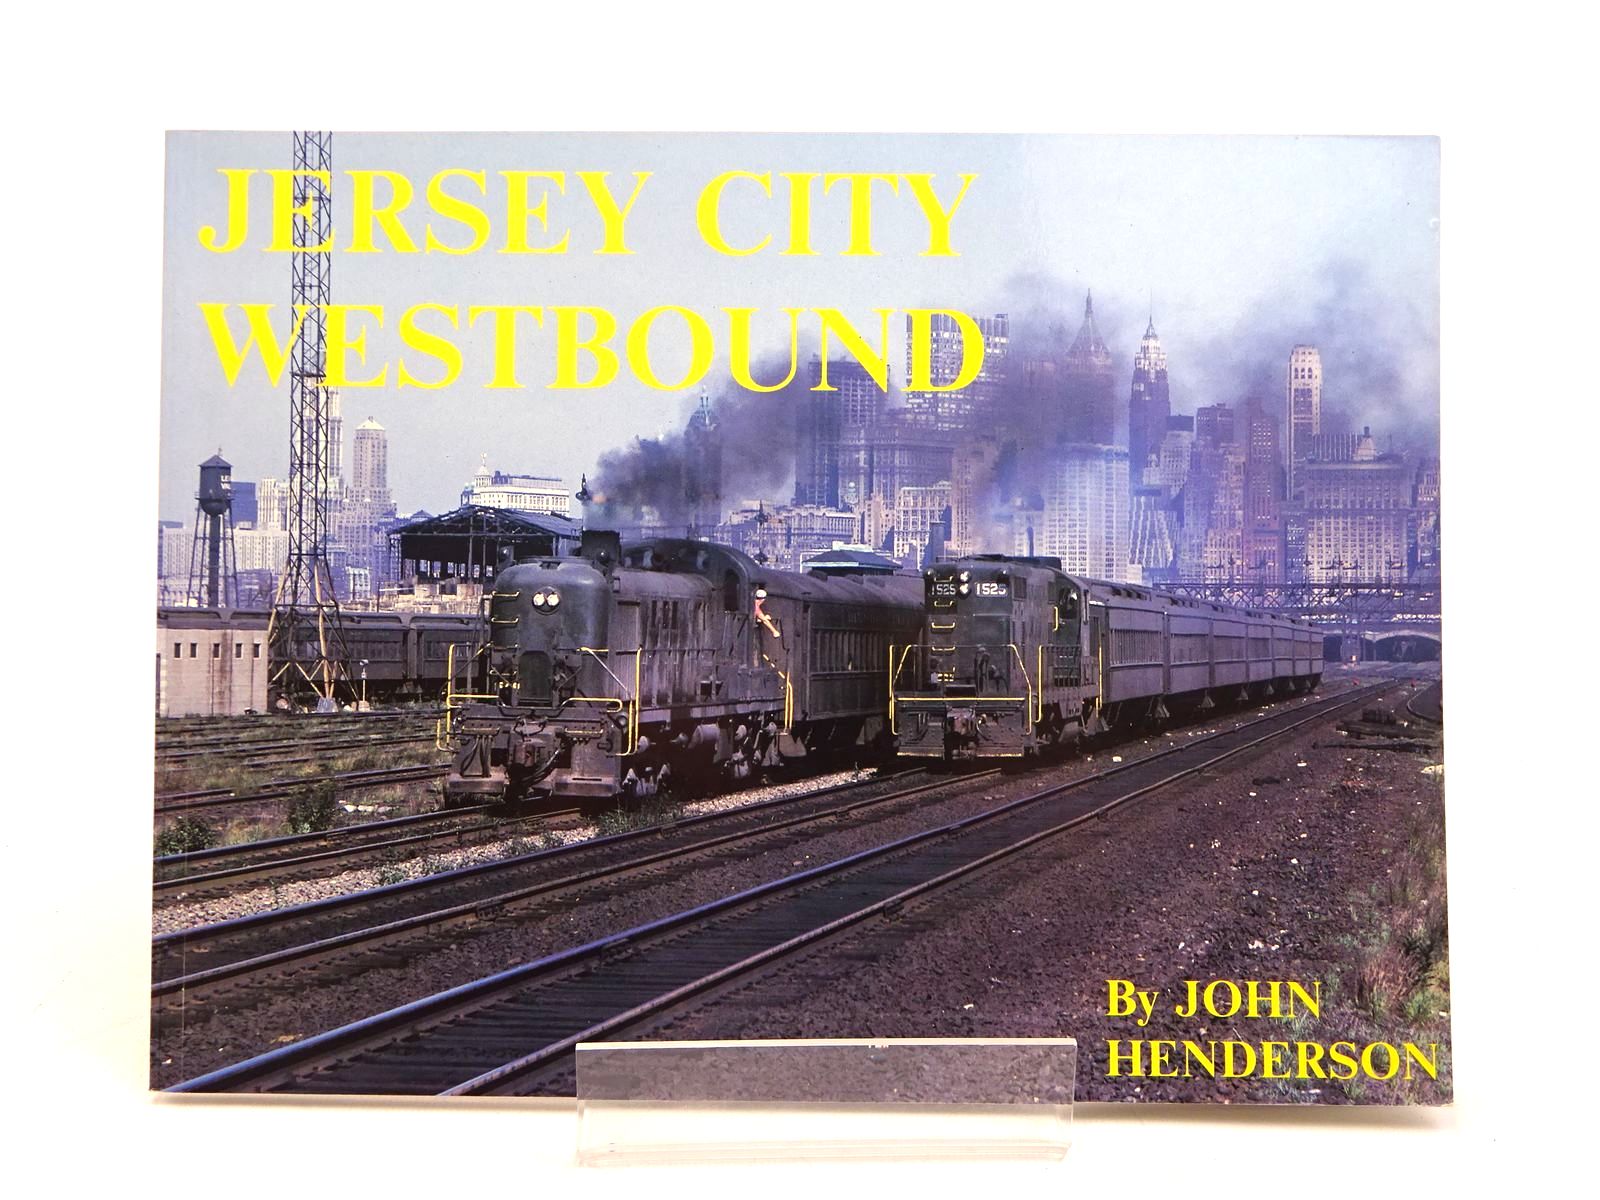 Photo of JERSEY CITY WESTBOUND written by Henderson, John published by H&m Productions (STOCK CODE: 1818019)  for sale by Stella & Rose's Books